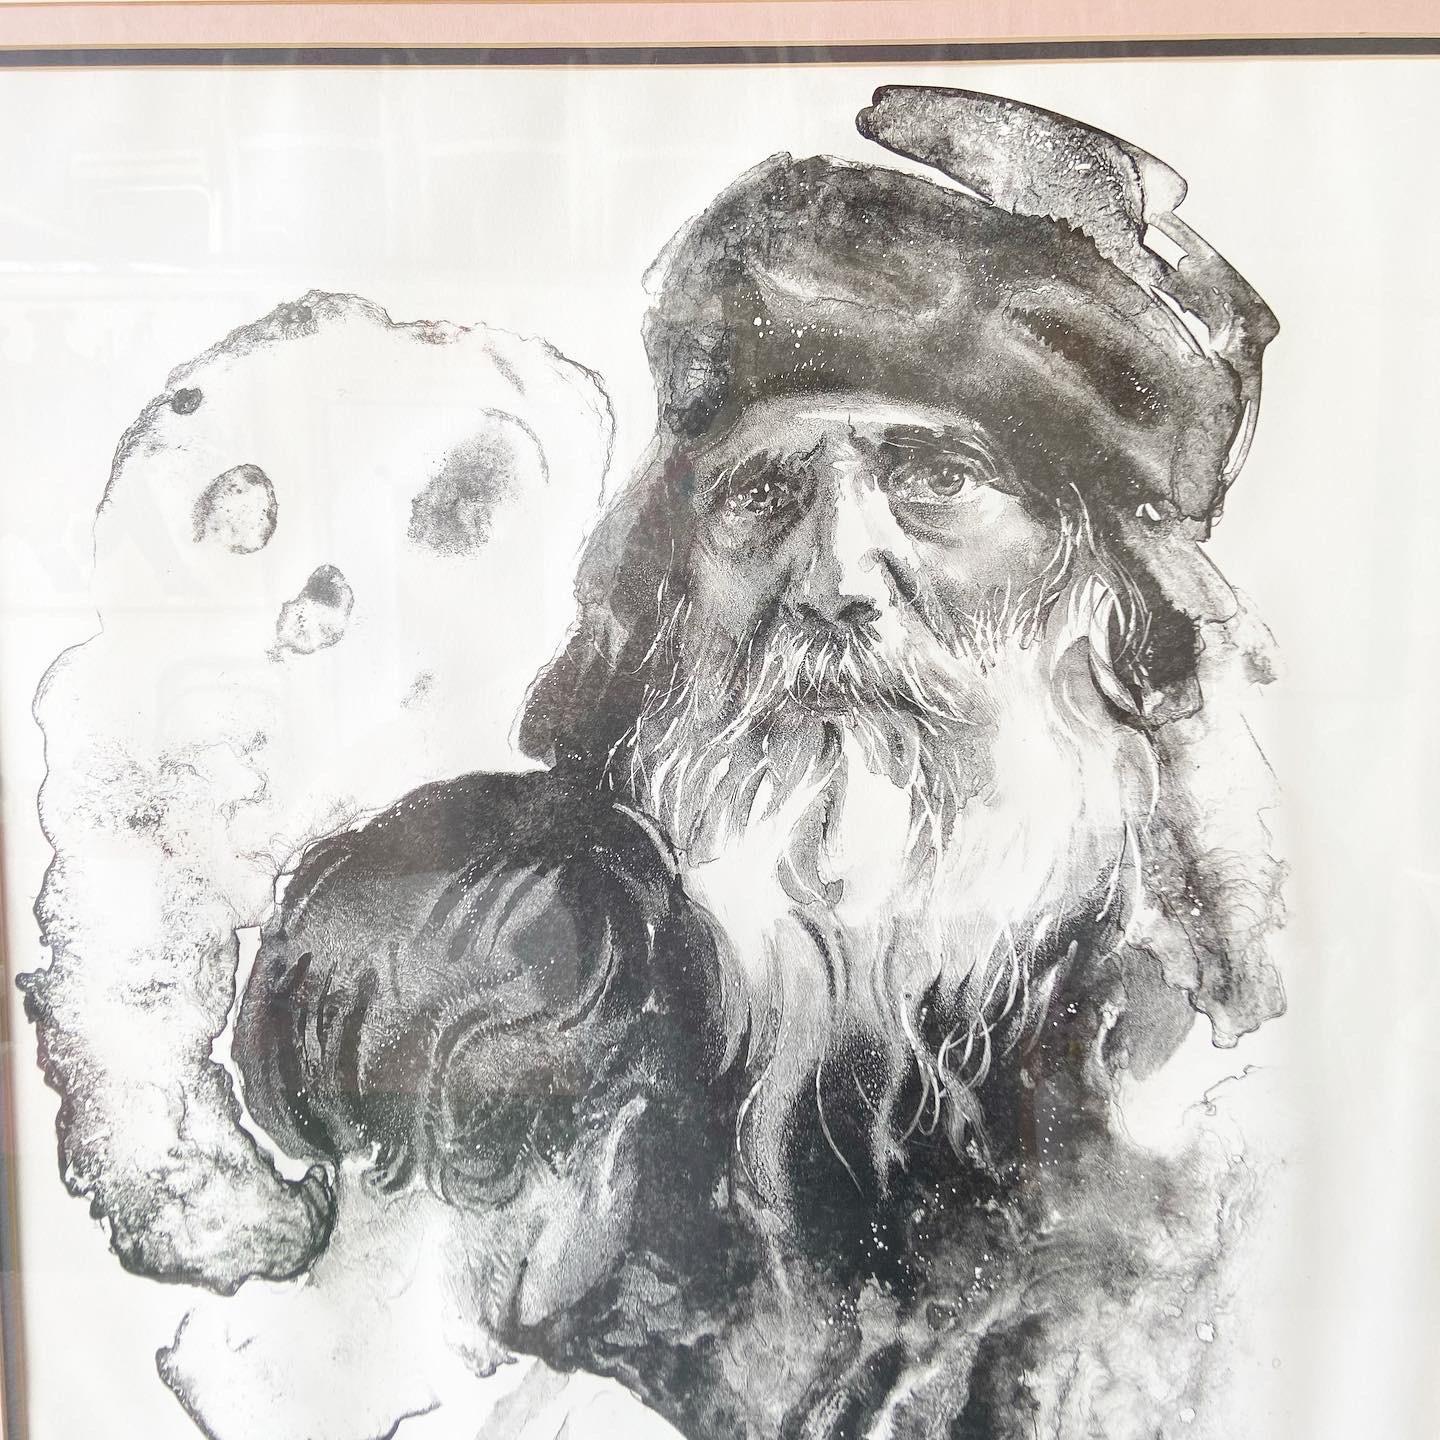 Beautiful artist proof Lithograph of Grandpa Holding his Grandson and ghost/spirit in Black & White by Romanian Painter Sandu Liberman.

Additional information:
Material: Lithograph
Color: Black, Pink, White
Style: Postmodern
Artist: Sandu